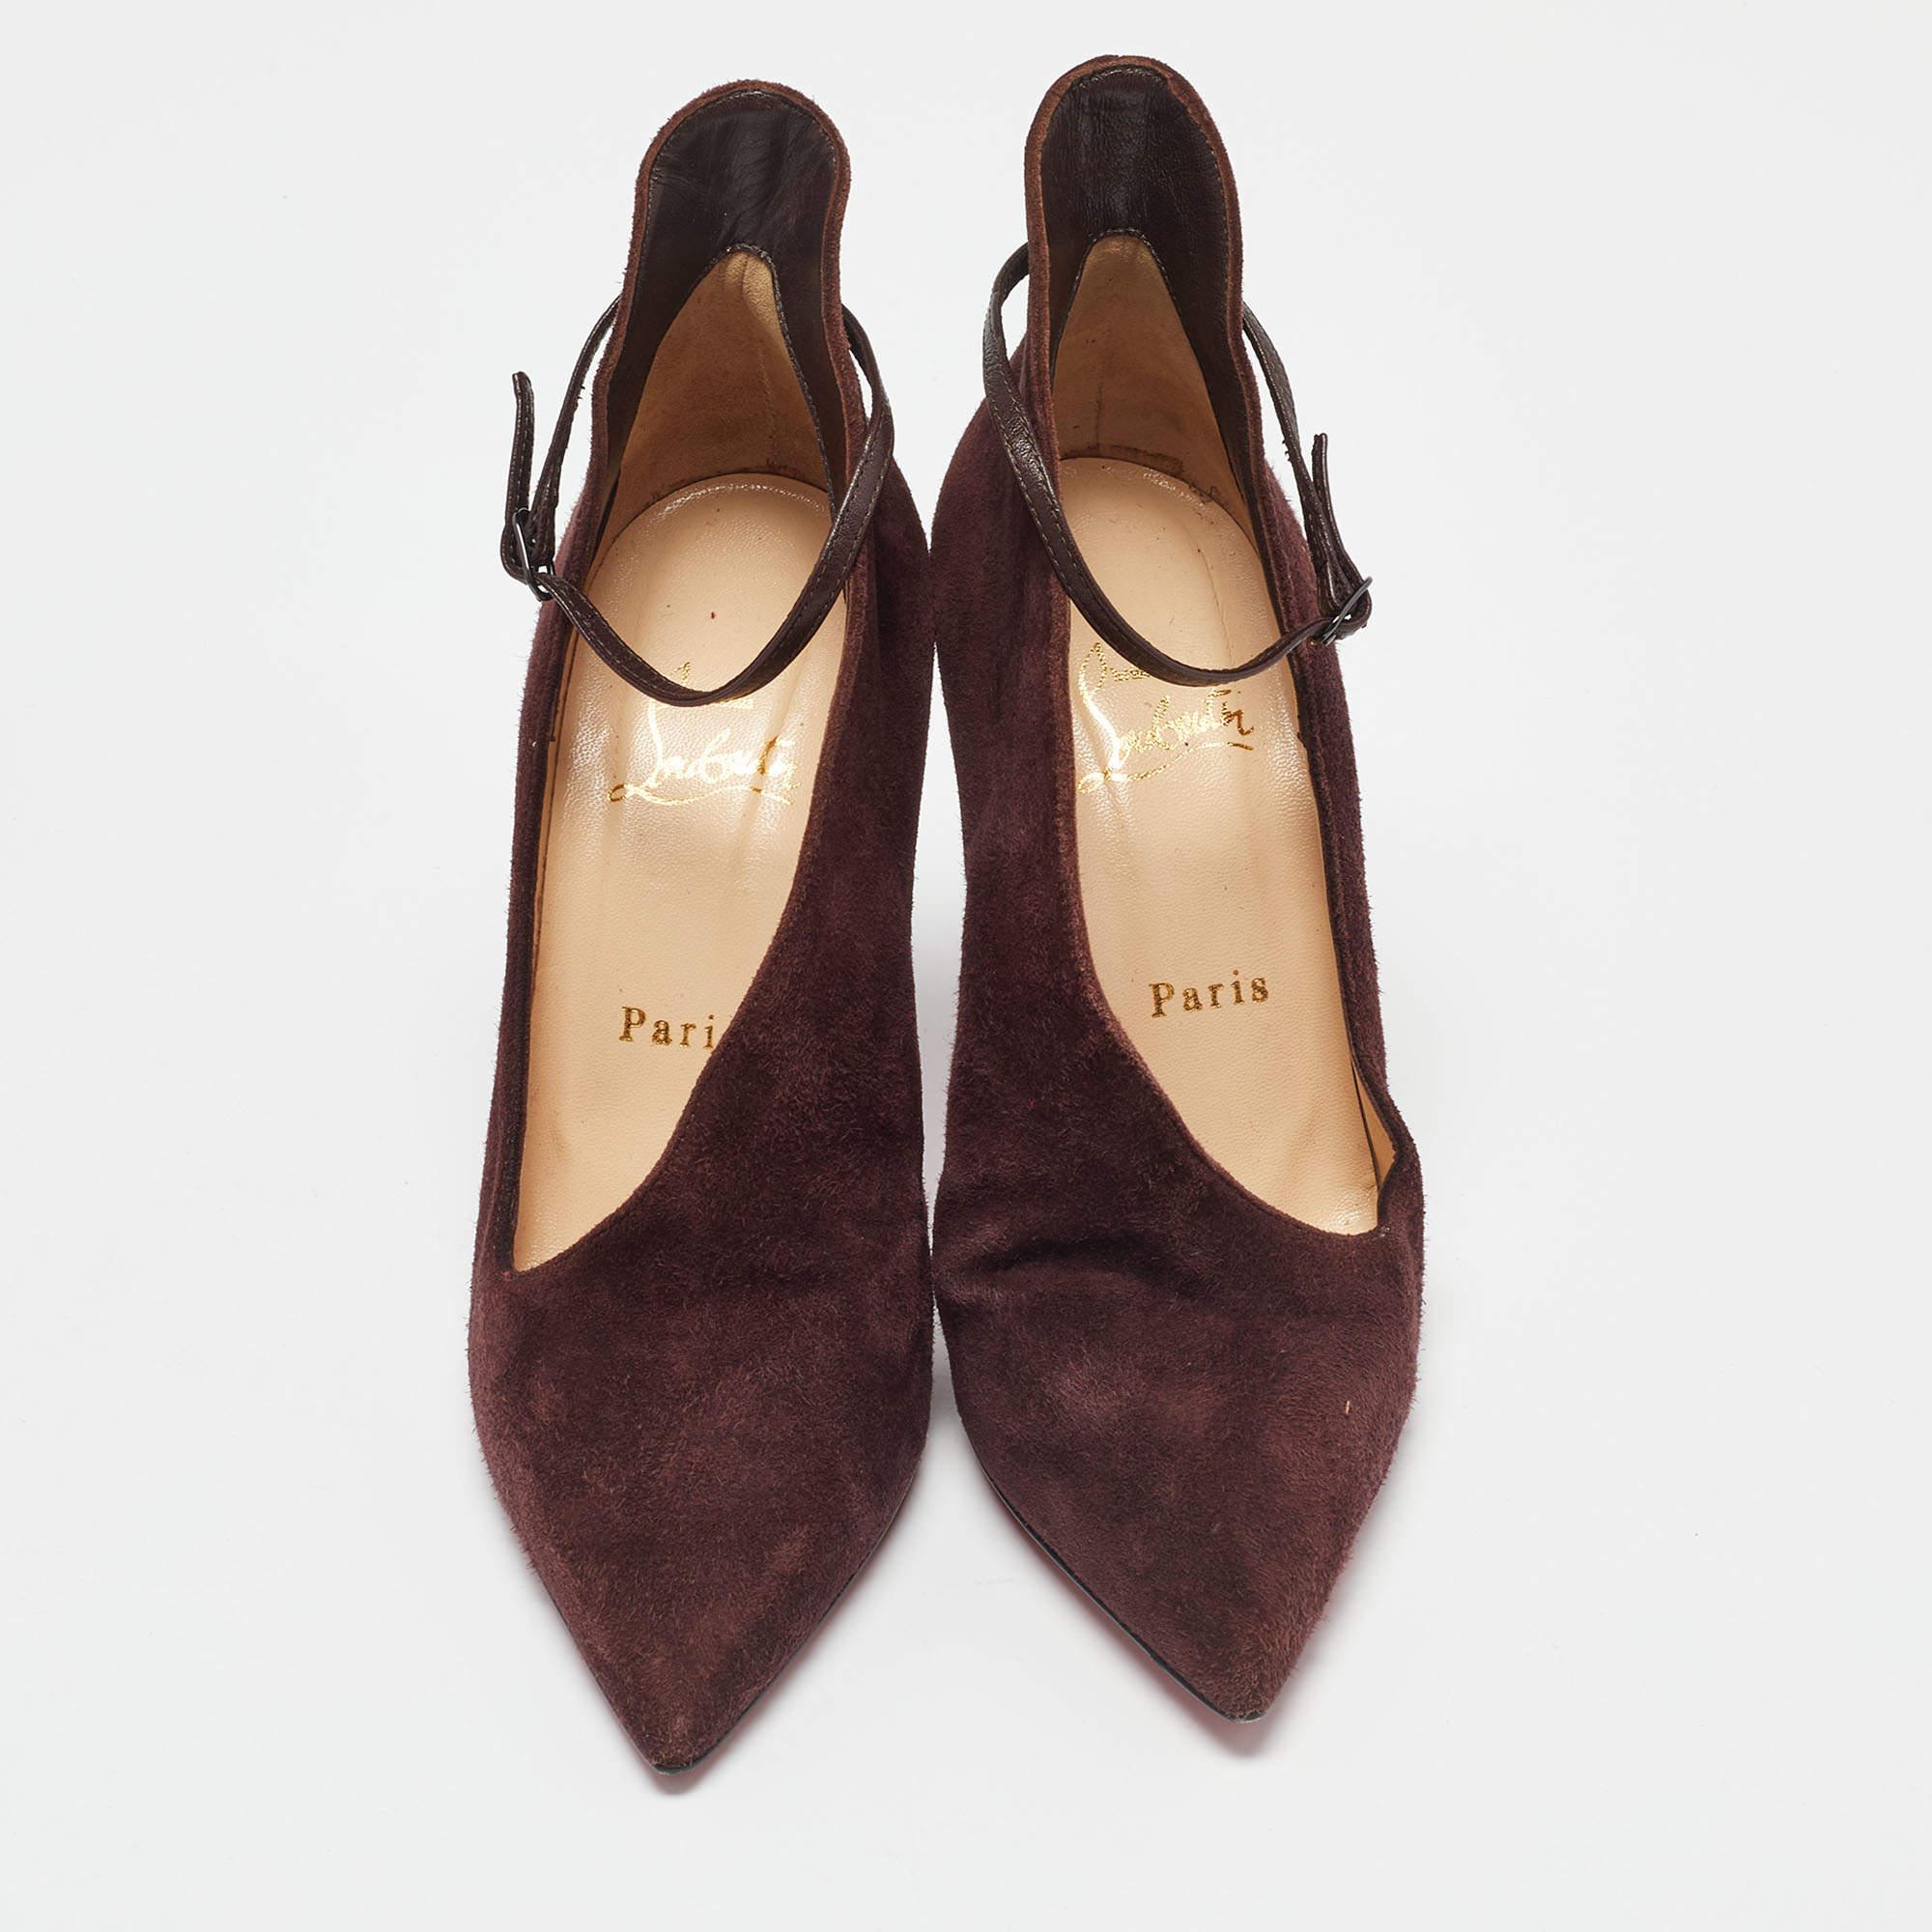 Christian Louboutin Dark Burgundy Suede Vampydoly Pumps Size 36 For Sale 1